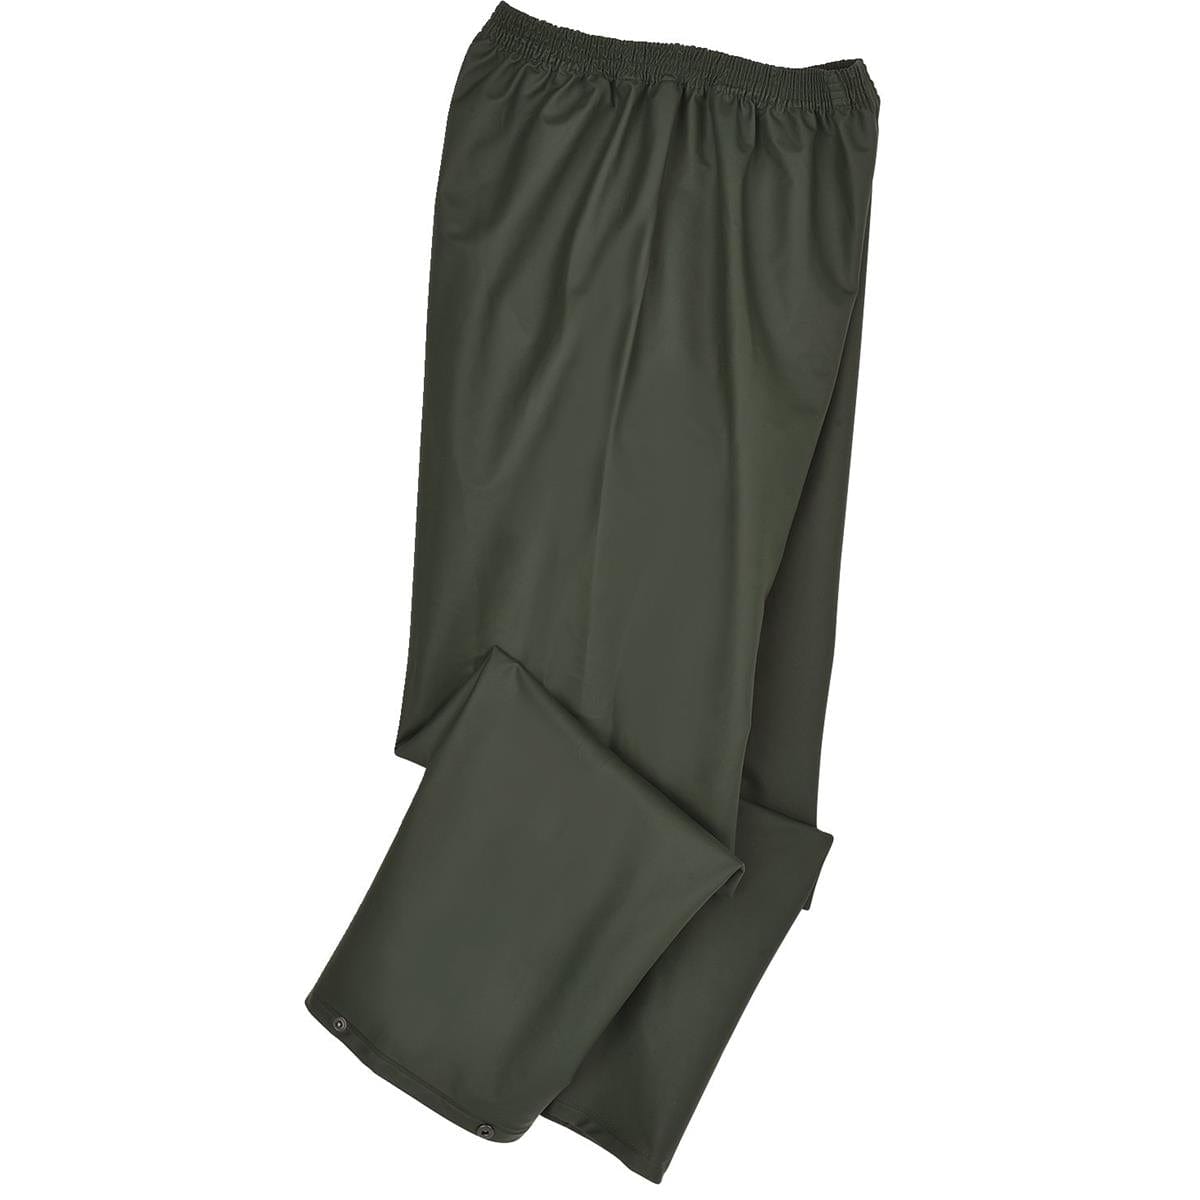 Rains Rain Pants Regular W3 - 70 €. Buy Jackets & Coats from Rains online  at Boozt.com. Fast delivery and easy returns